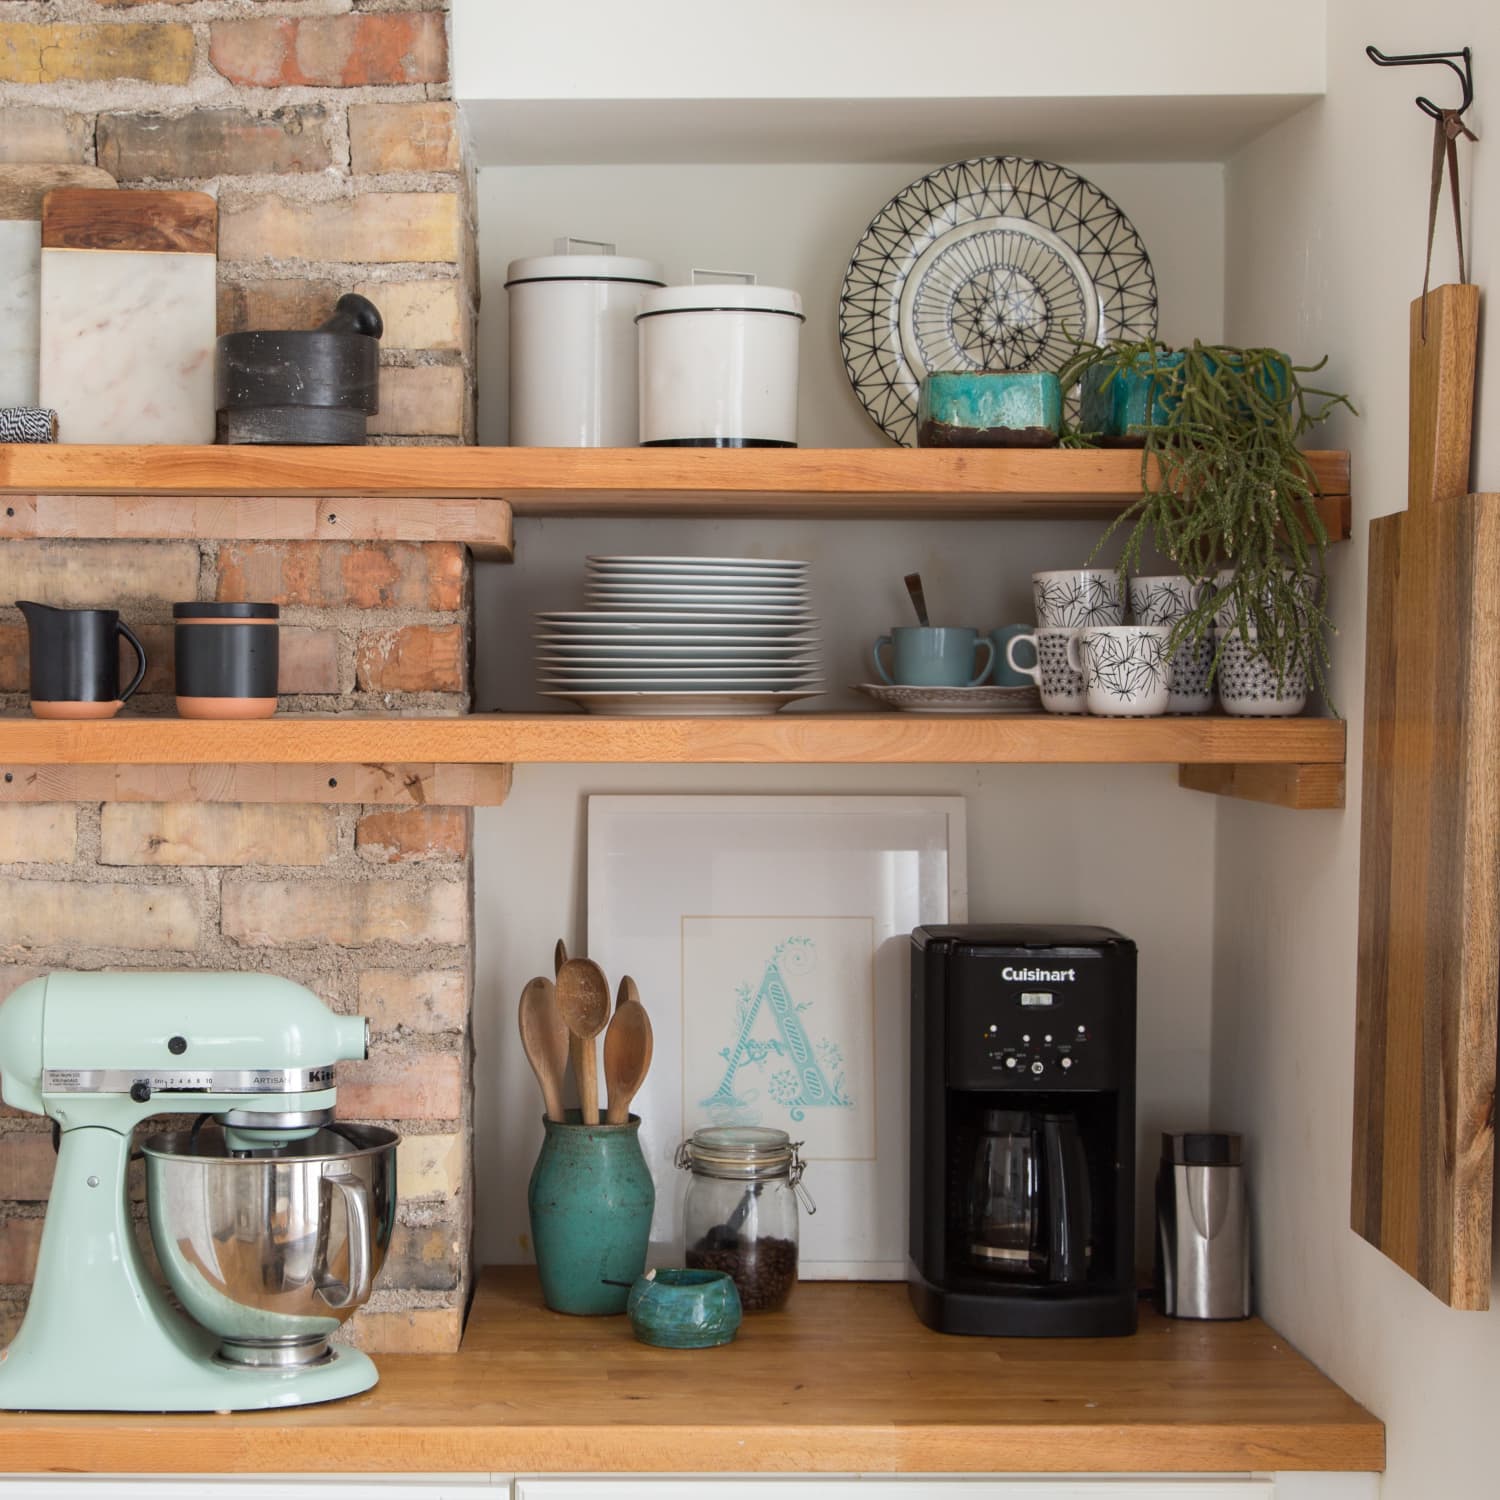 10 Snazzy Ways to Organize and Store Small Appliances